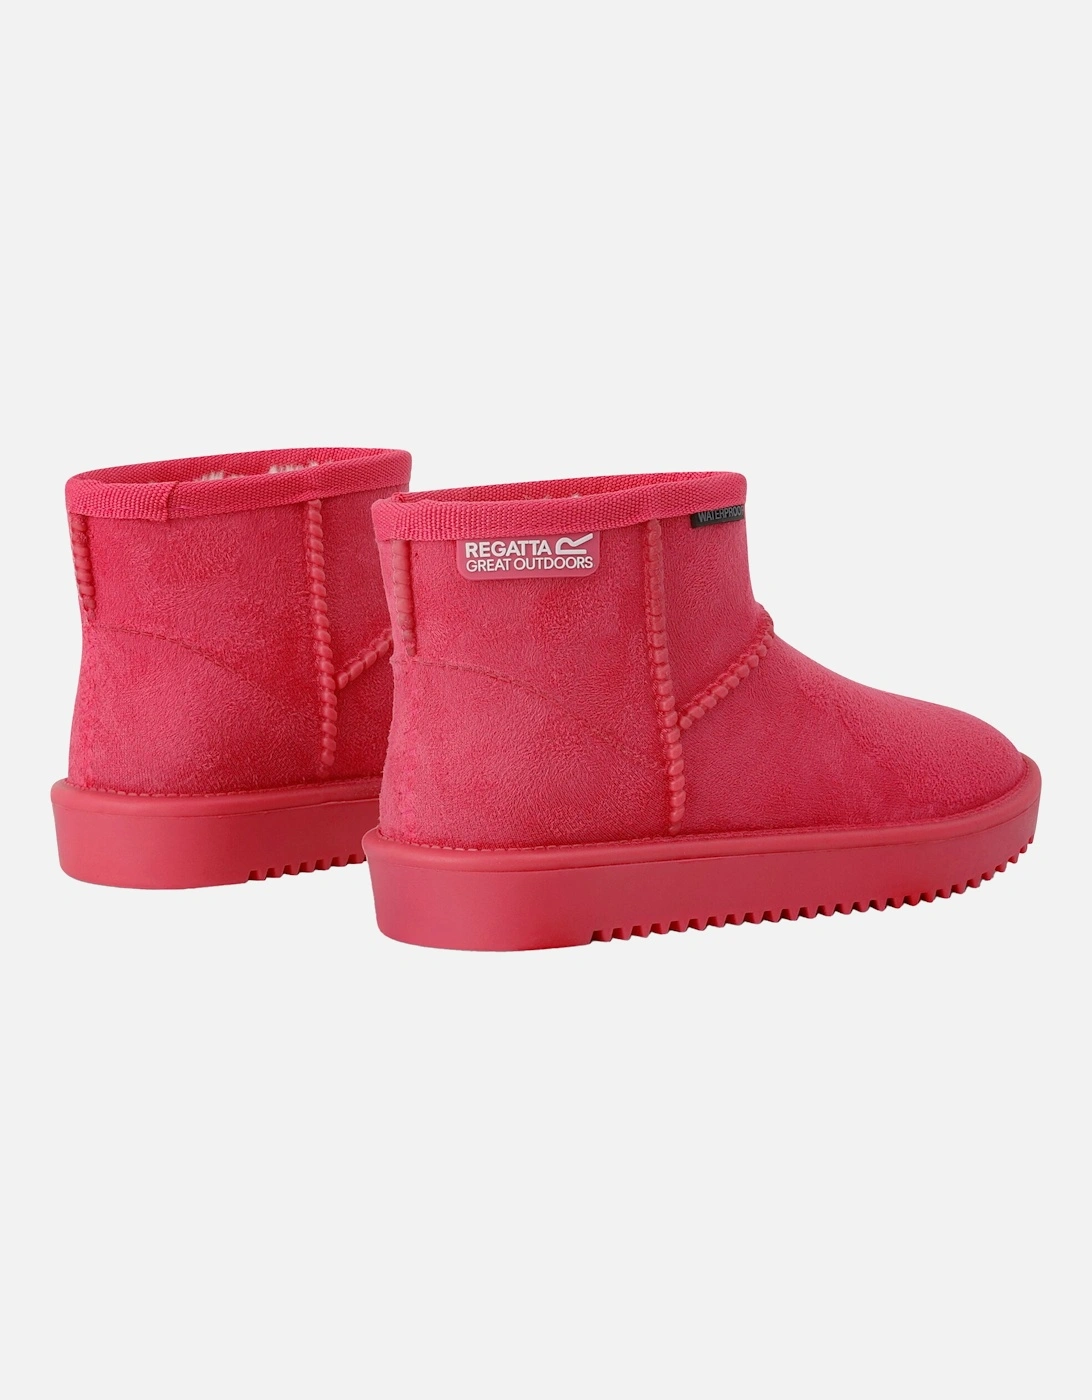 Childrens/Kids Risely Faux Fur Lined Waterproof Snow Boots